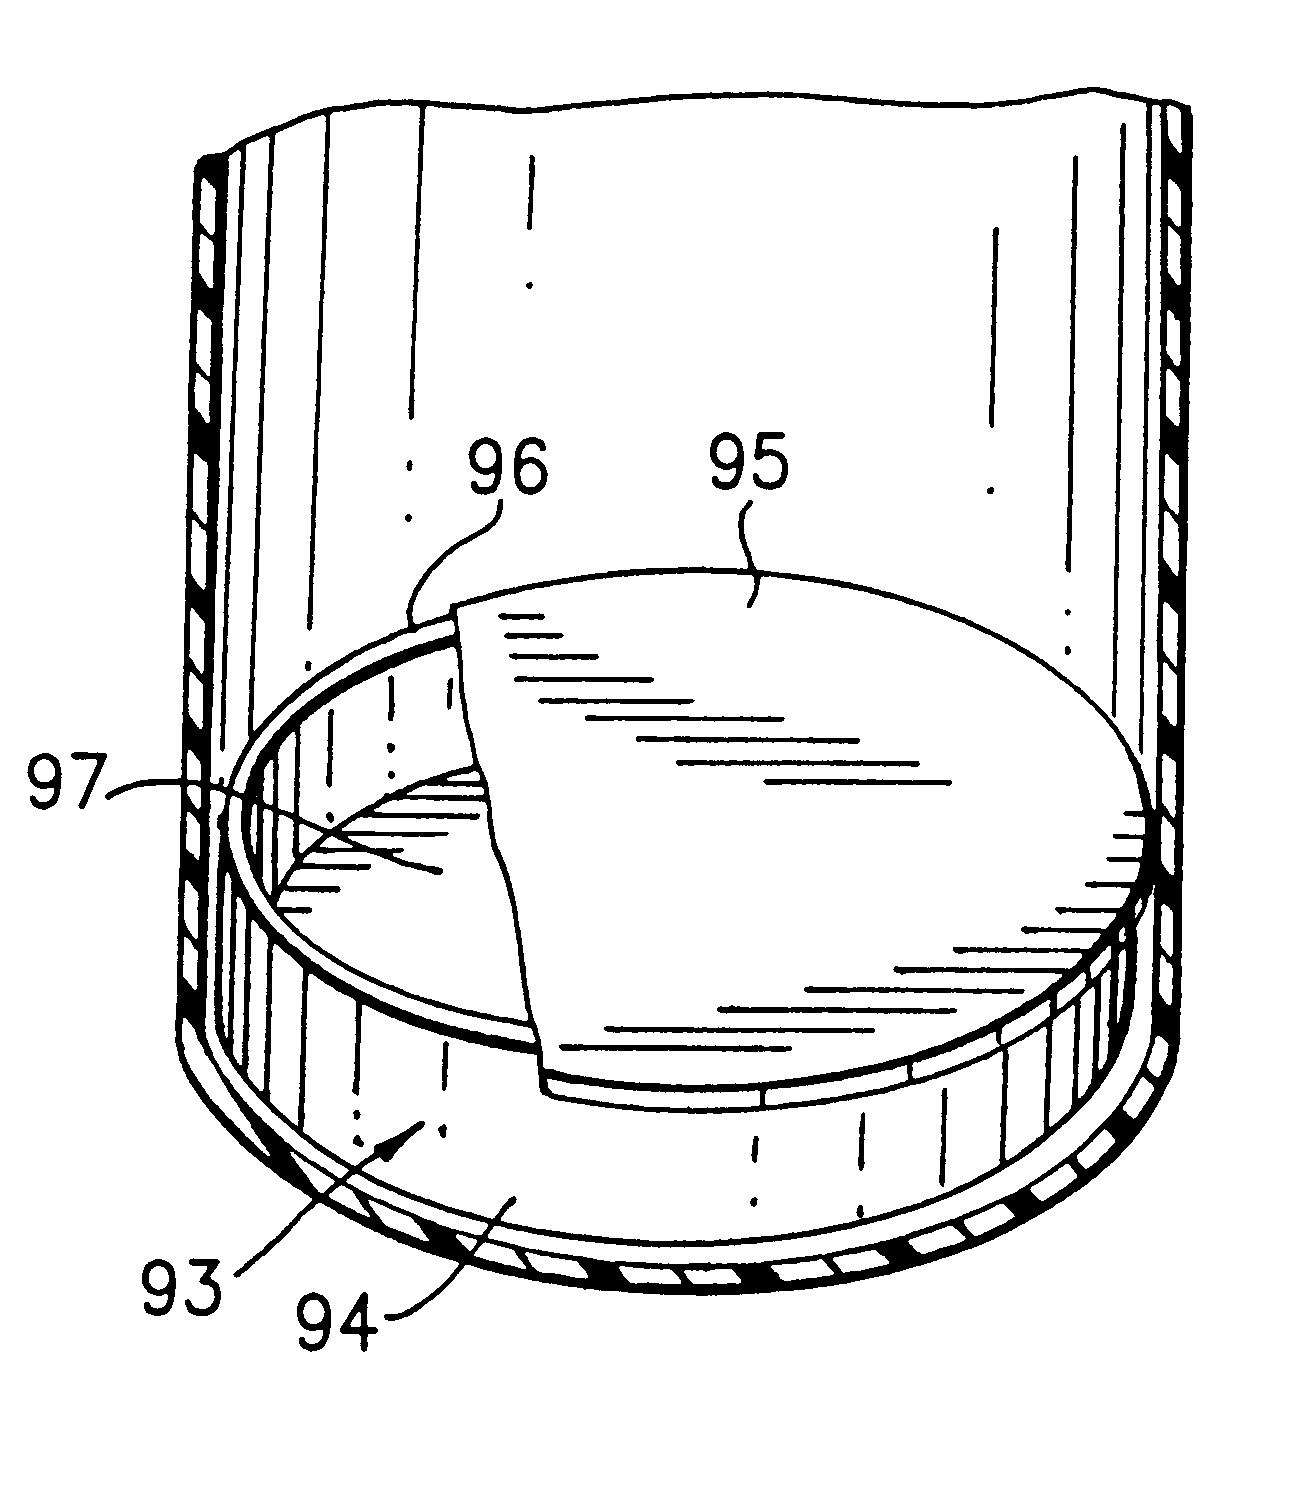 Fluid-filled capacitor with pressure interrupter means and internal compressible air chamber